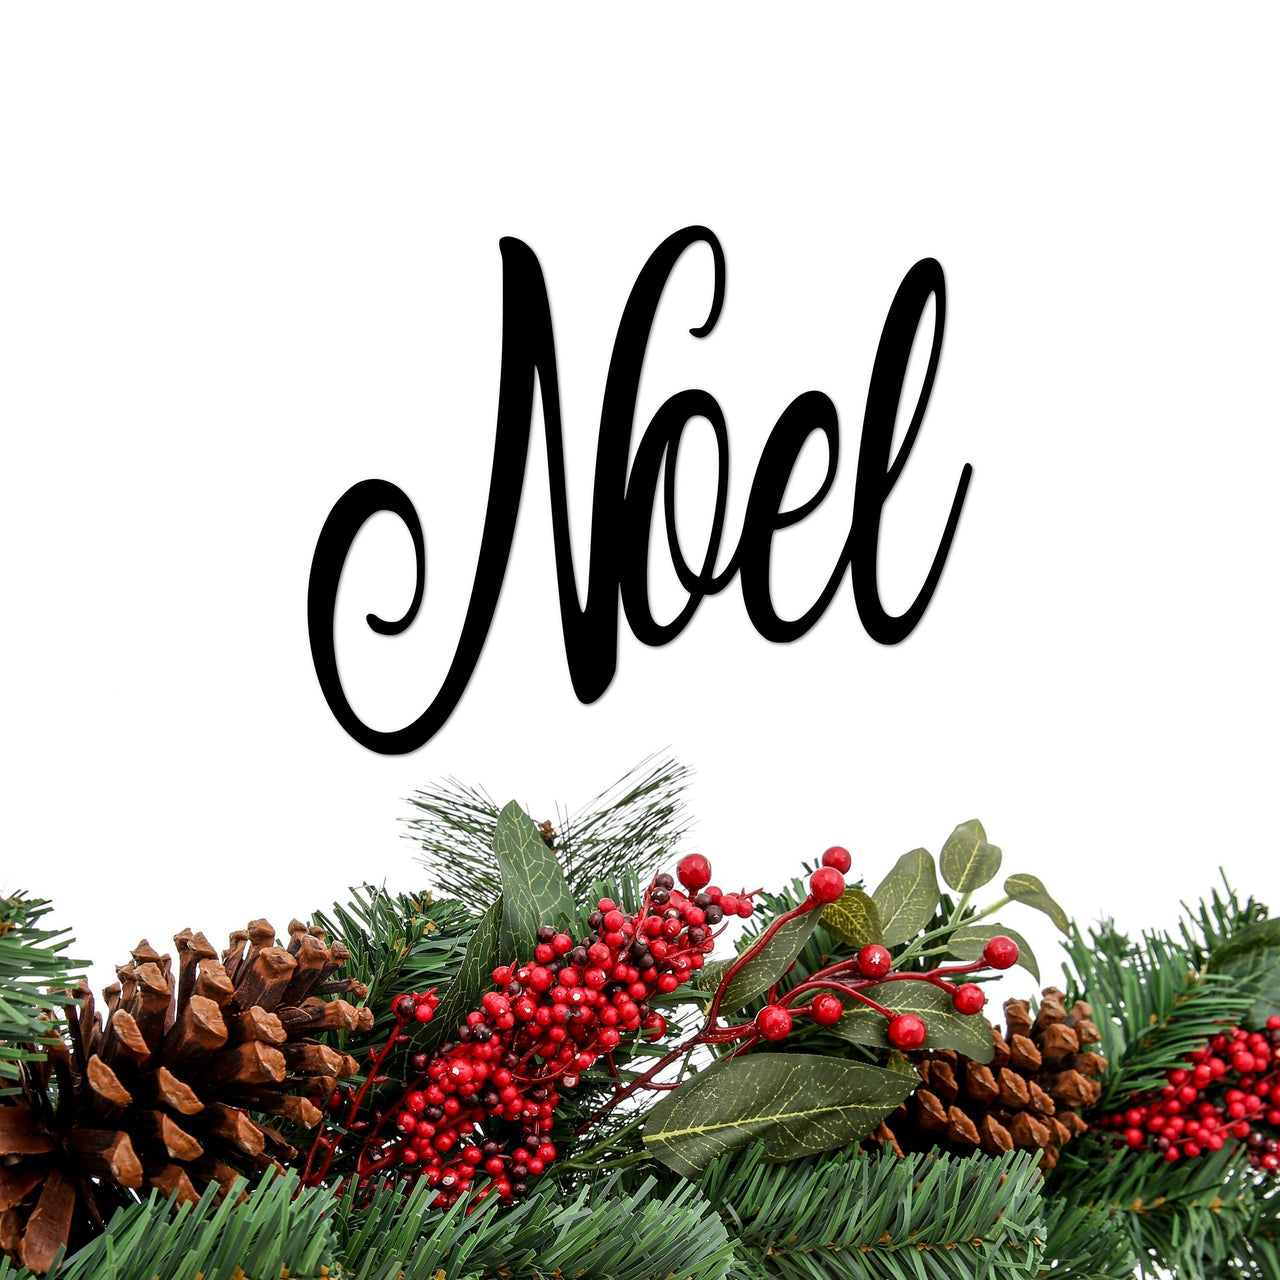 Noel Sign Metal Wall Word | Christmas Sign | Holiday Decor | Script Noel Wall Hanging | Christmas Ornament for Tree | Cursive Steel Word